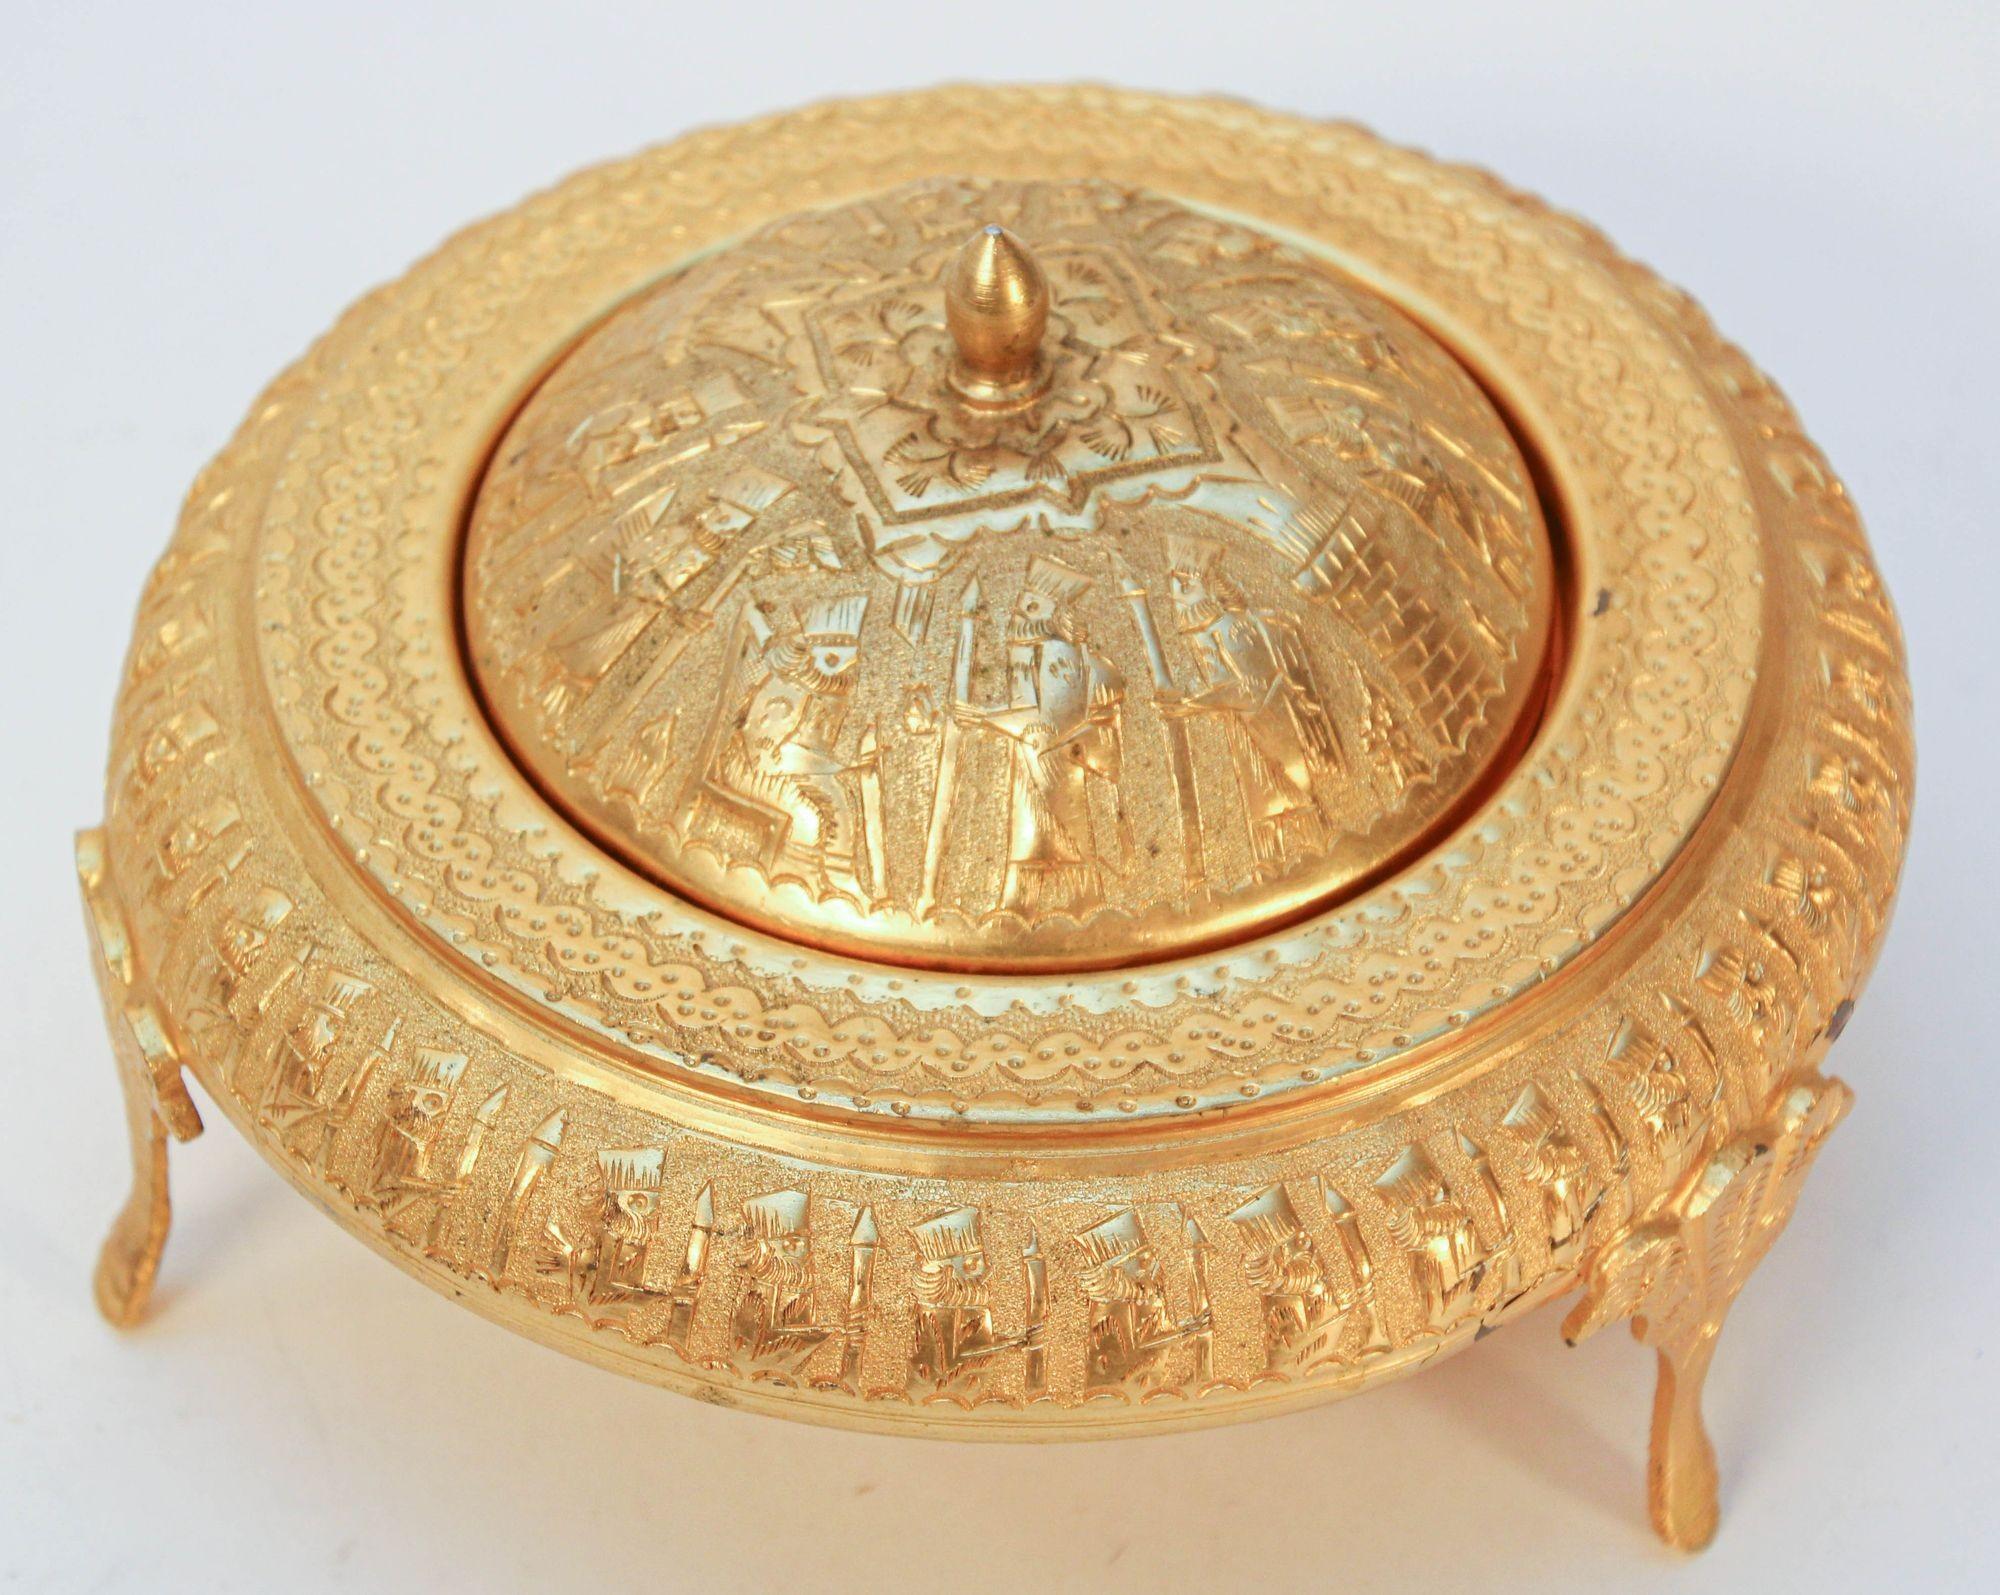 Vintage Middle Eastern Moorish Roll Top Gold-Toned Caviar Footed Dish Server.
Exquisite footed brass Persian Moorish caviar serving bowl with intricate decoration.
Elegant vintage Middle Eastern roll-top caviar dish resting on a footed base.
Footed